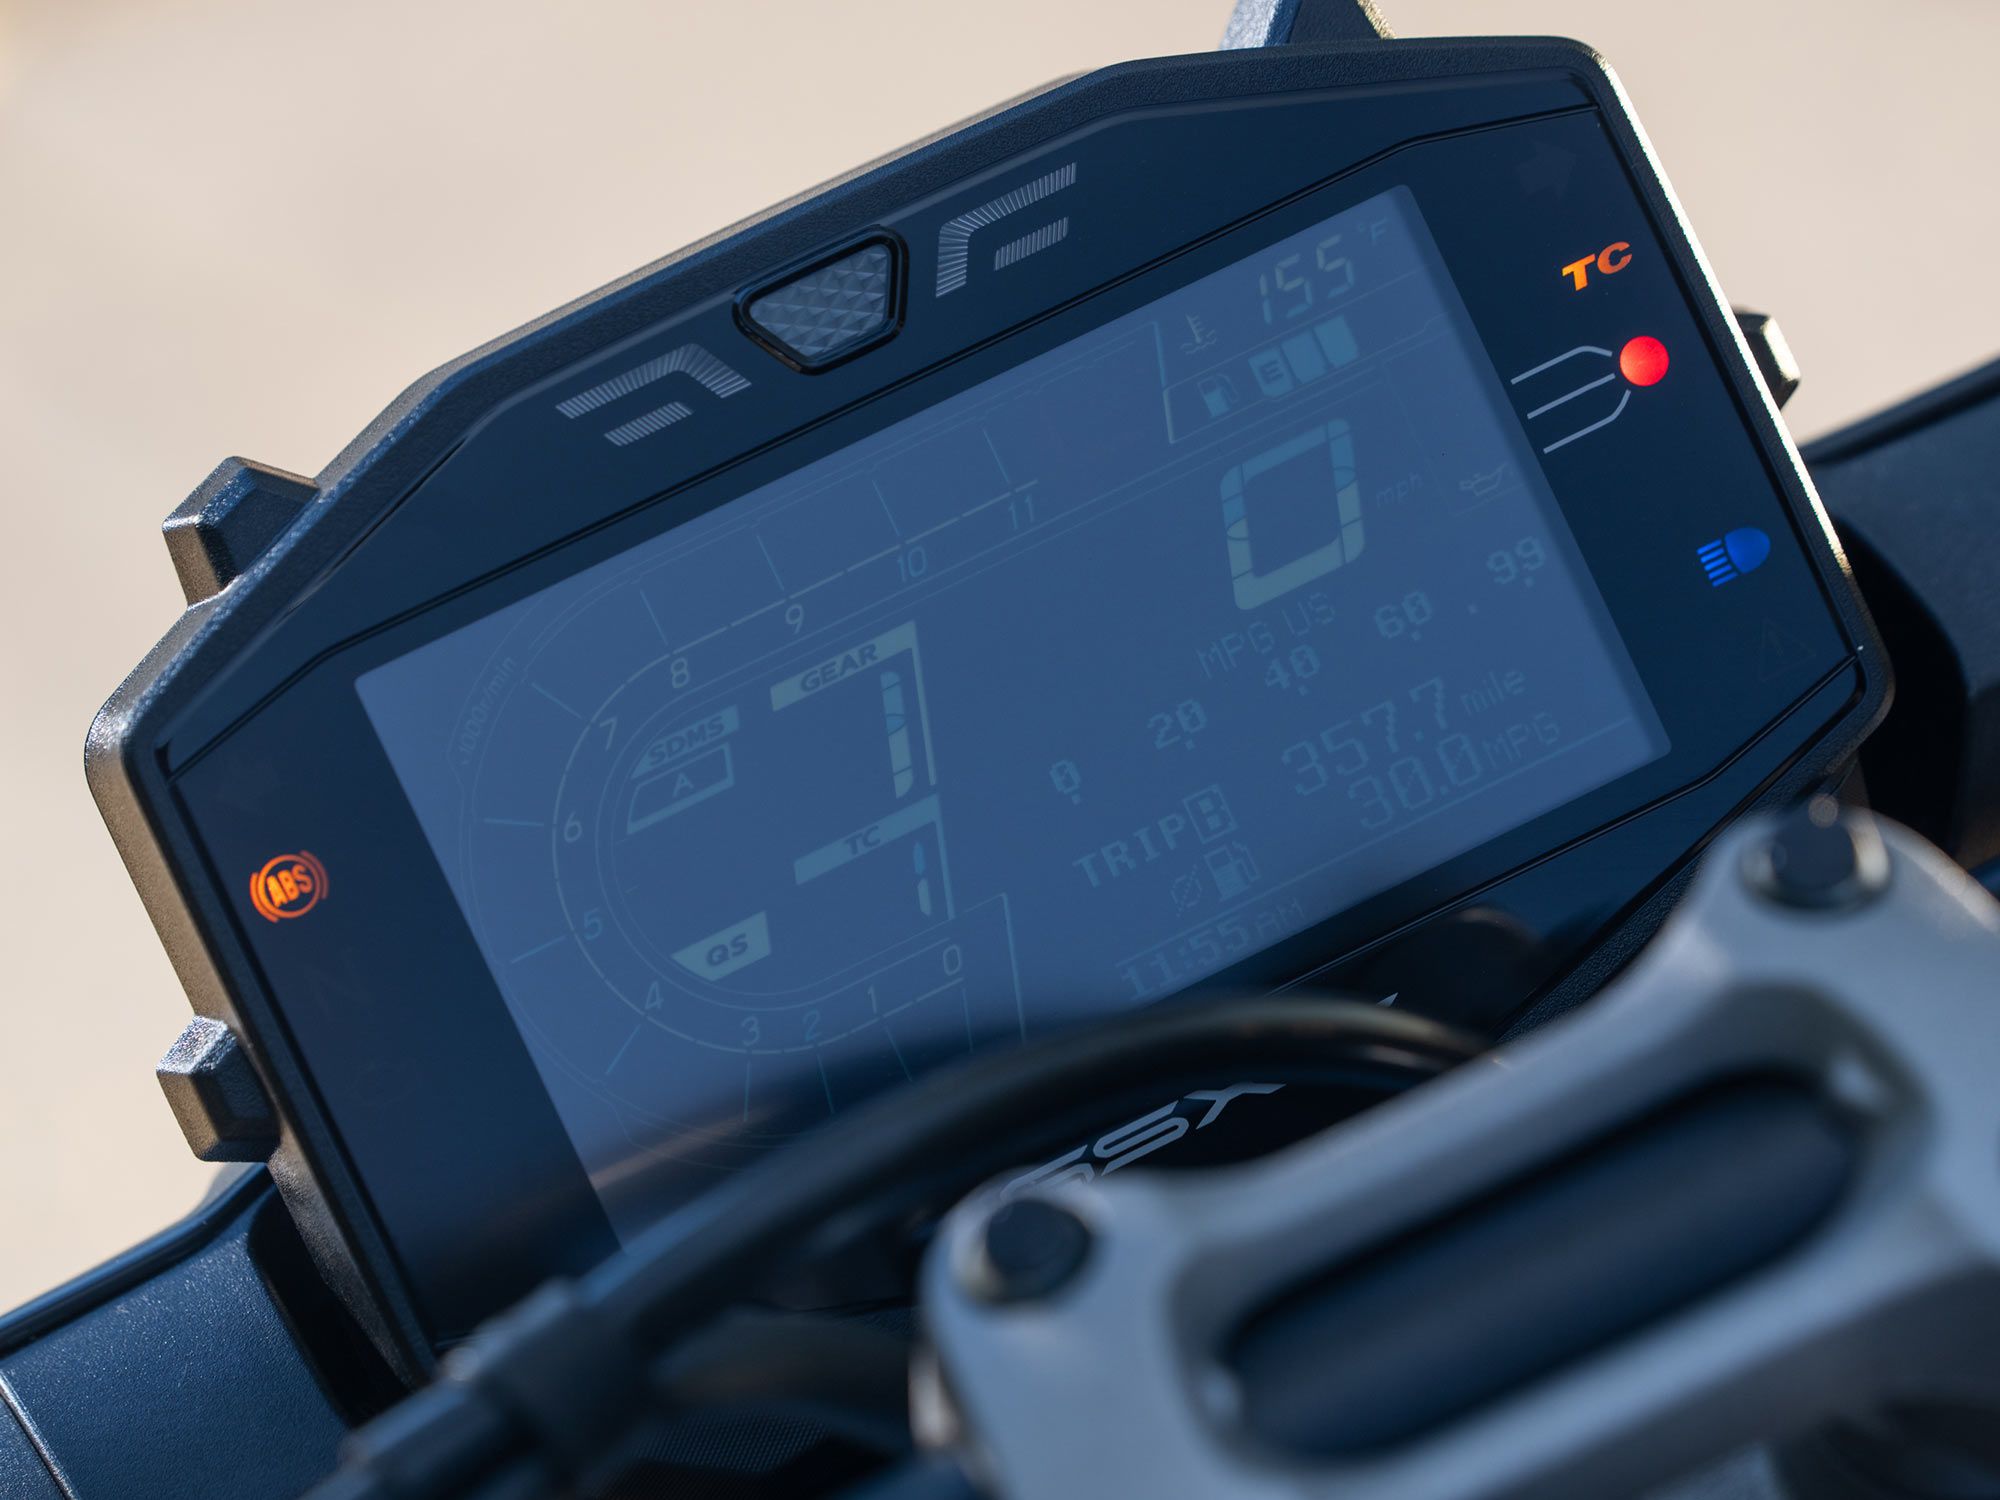 We like the appearance of the GSX-S1000 one-color display. However the fonts are too small and there is too much information packed into too small of a space.